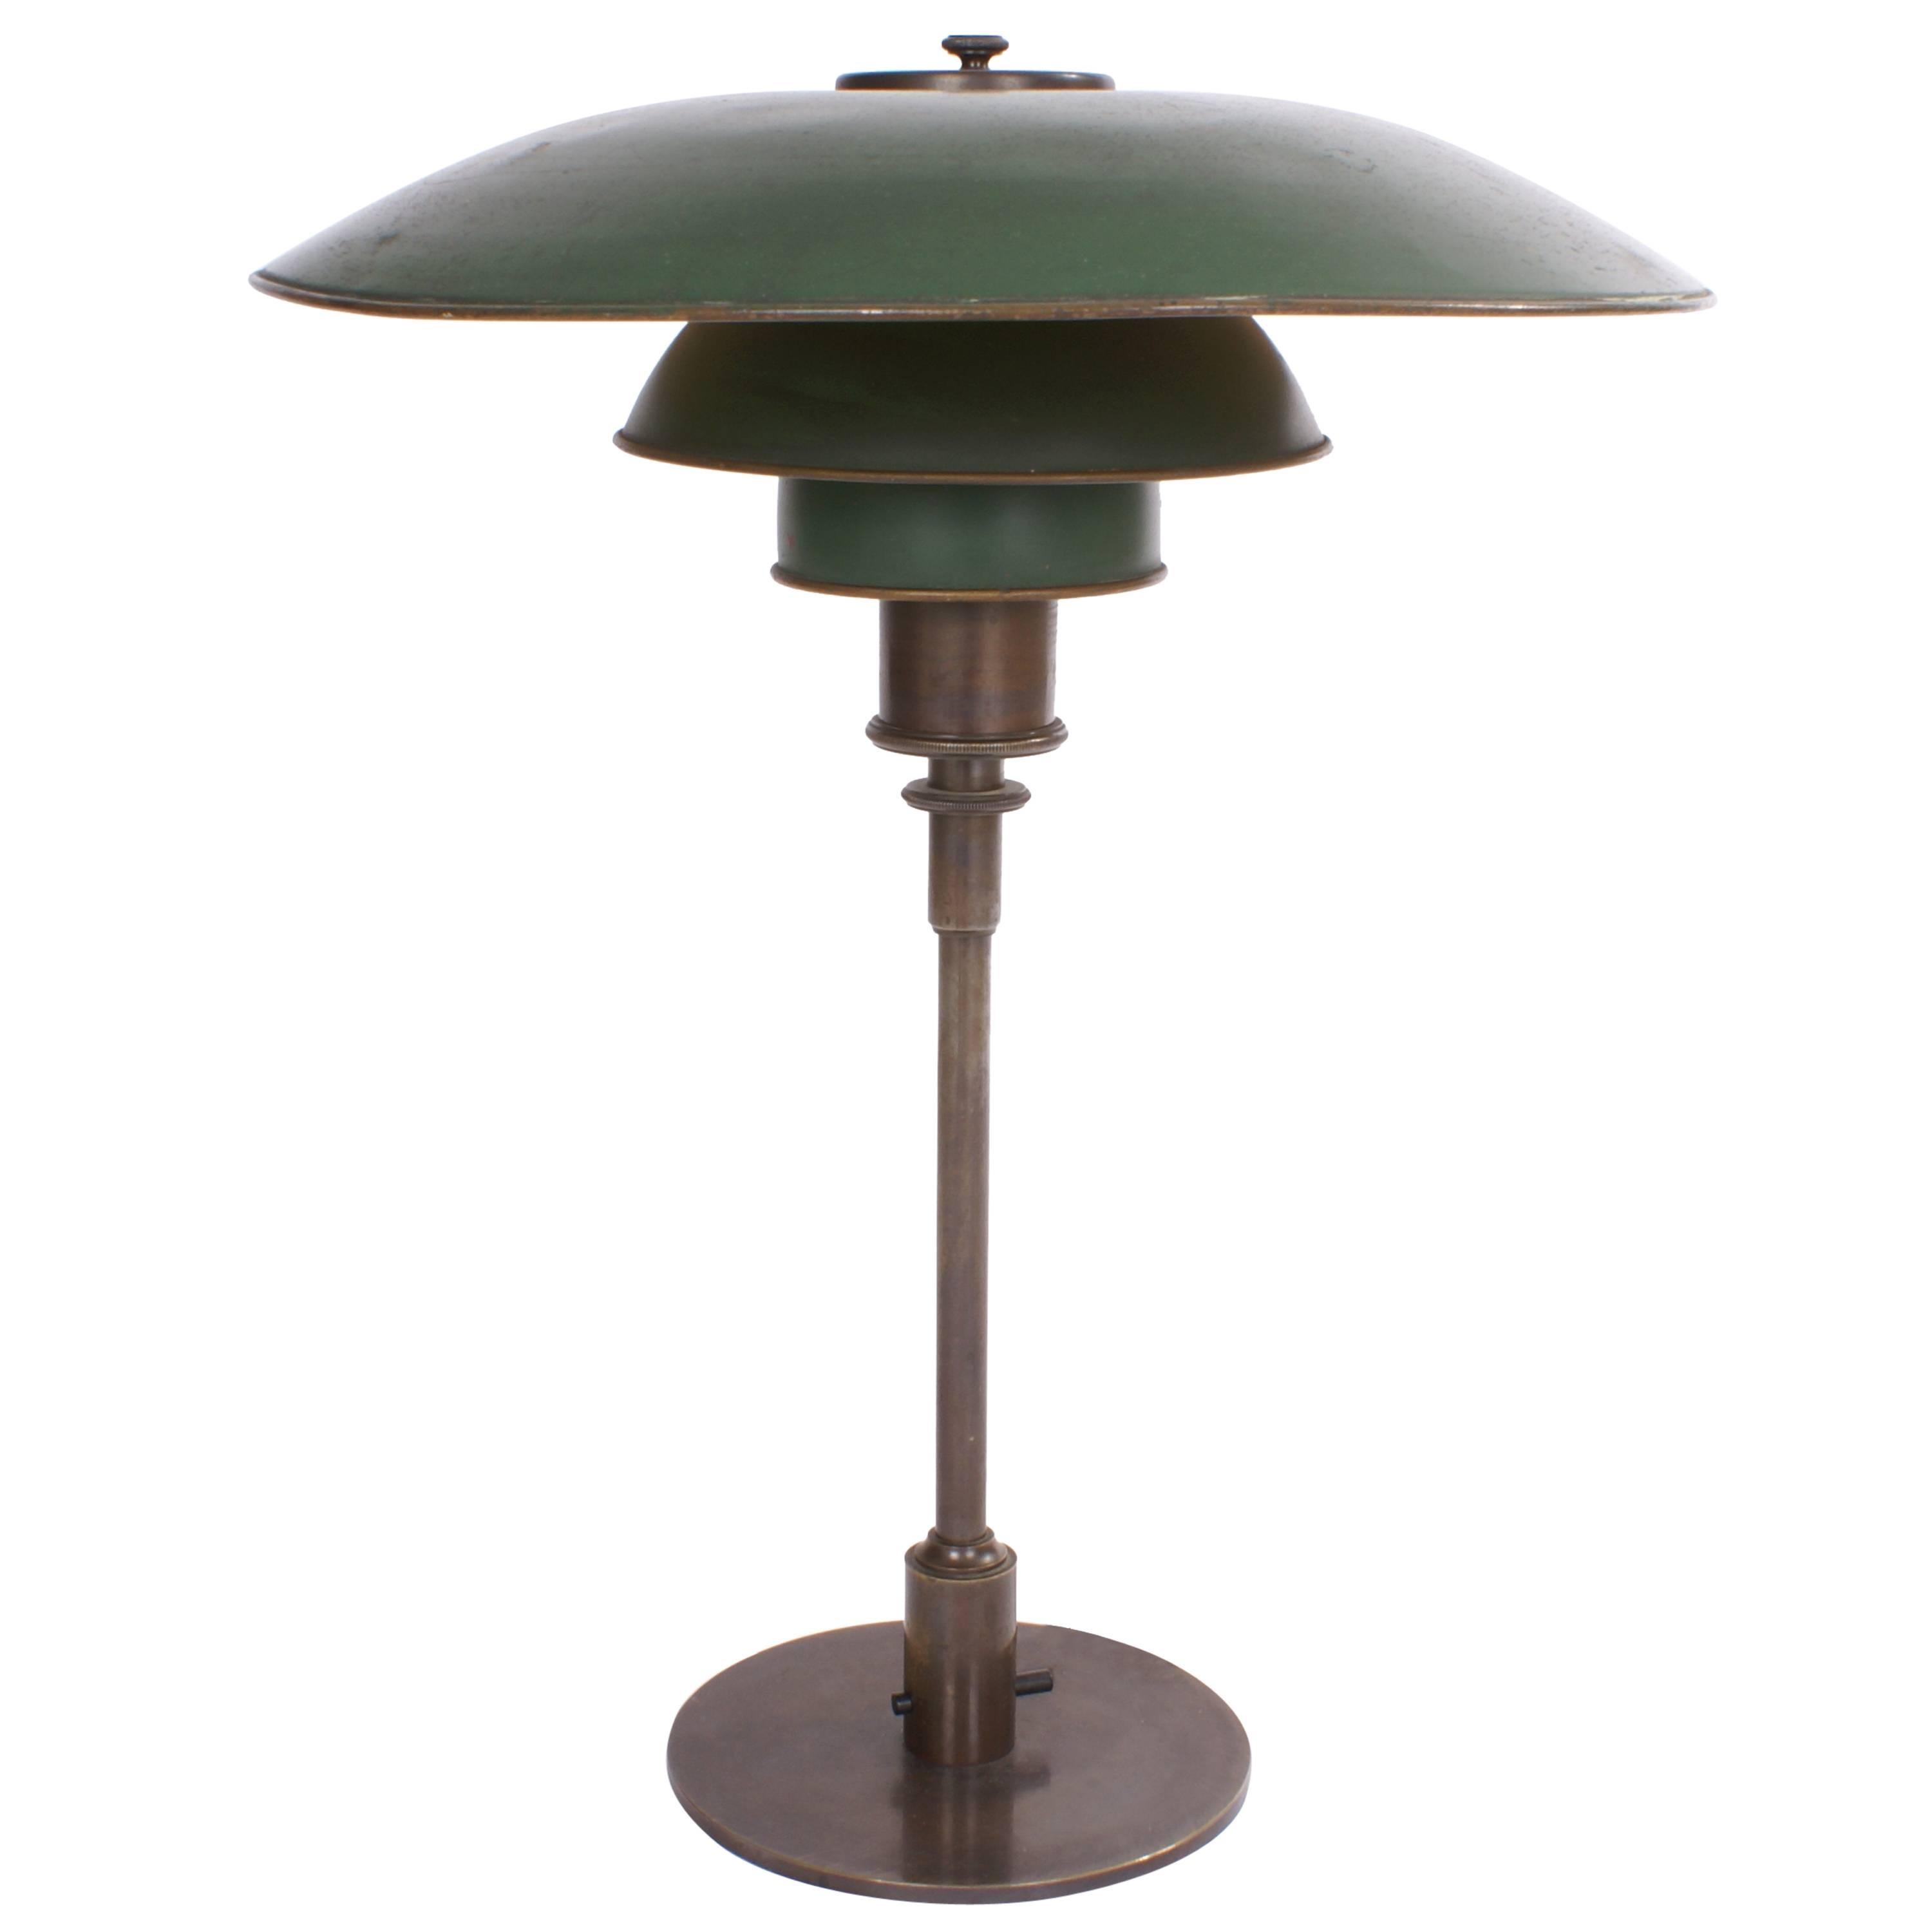 Poul Henningsen 'PH 4/3' Desk Lamp with Green Copper Shades, 1926-1928 For Sale